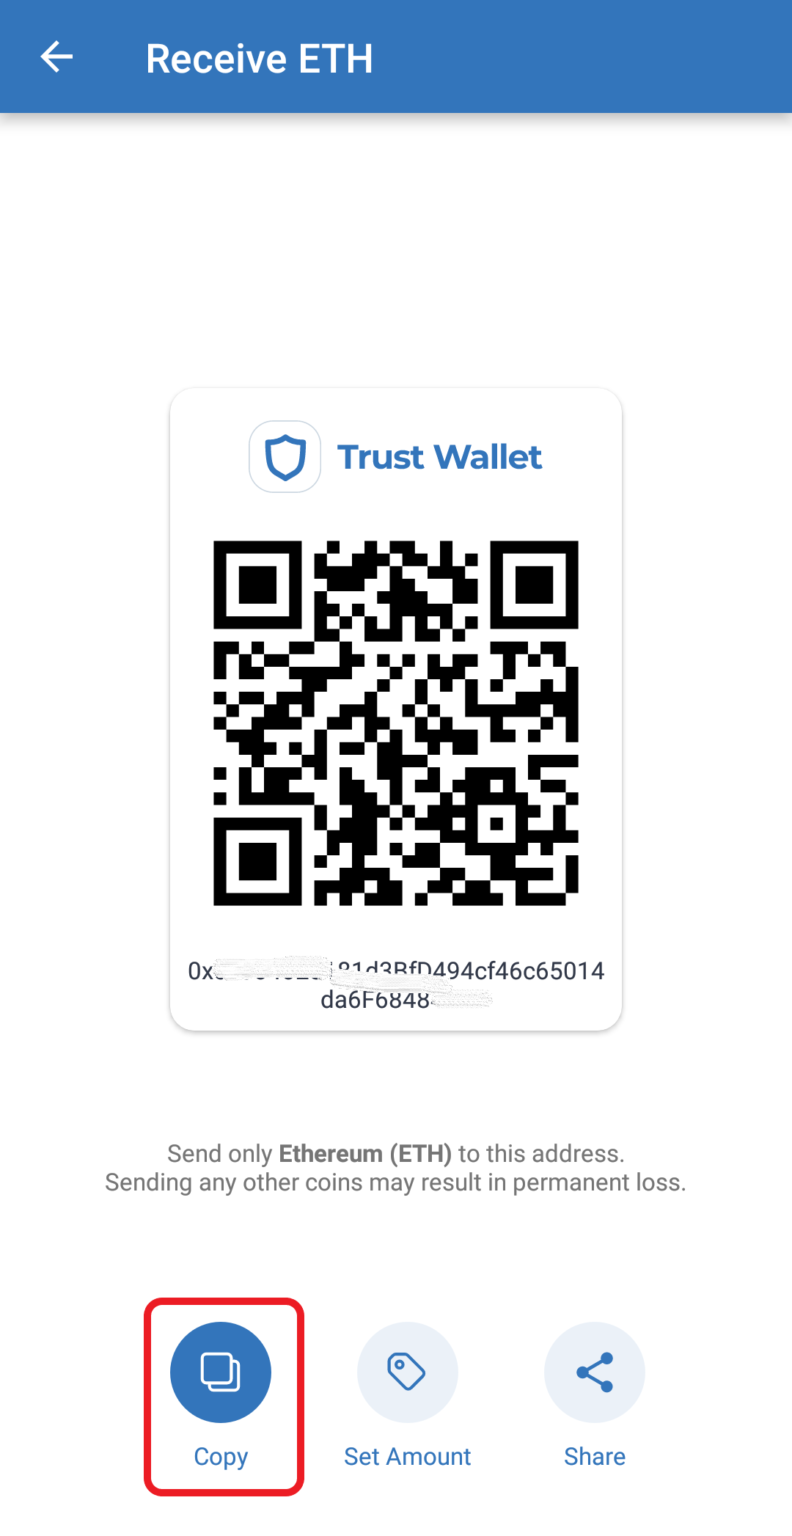 can you transfer from crypto.com to wallet